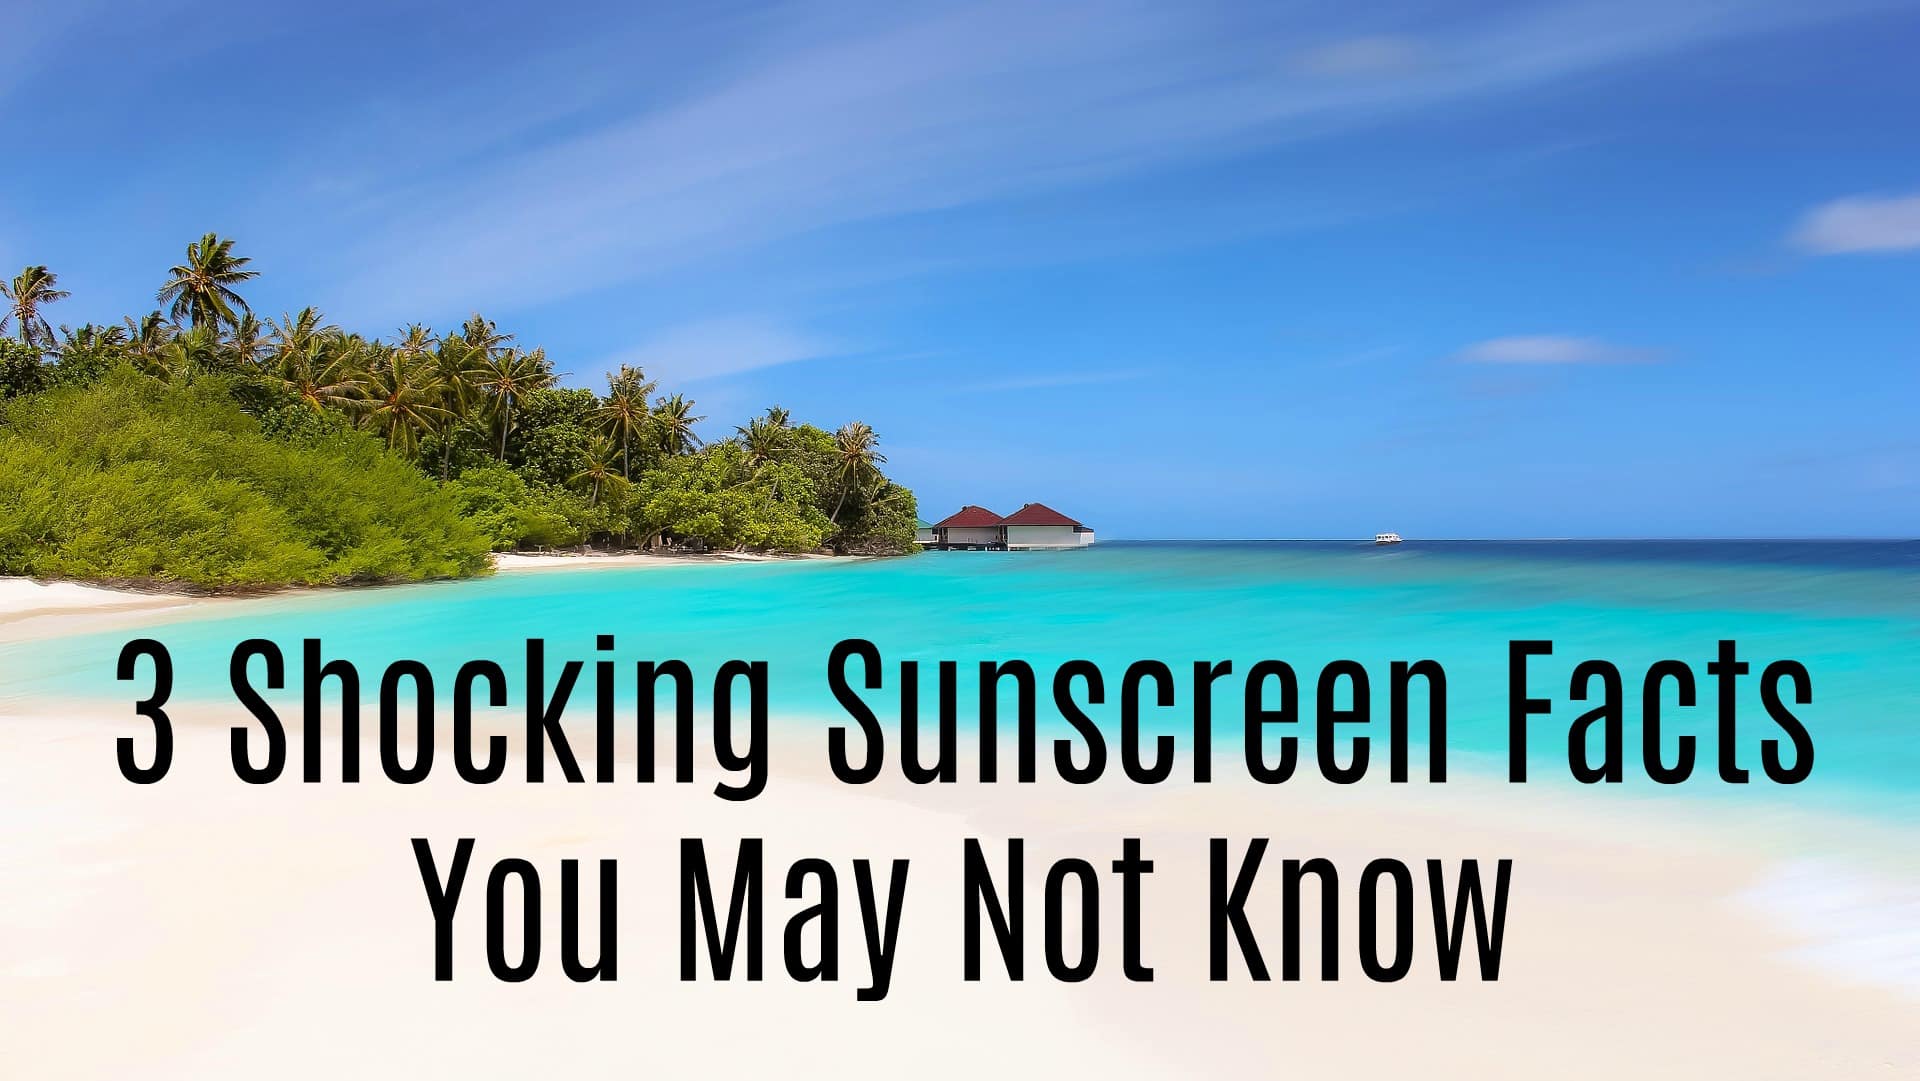 3 shocking sunscreen facts you may not know